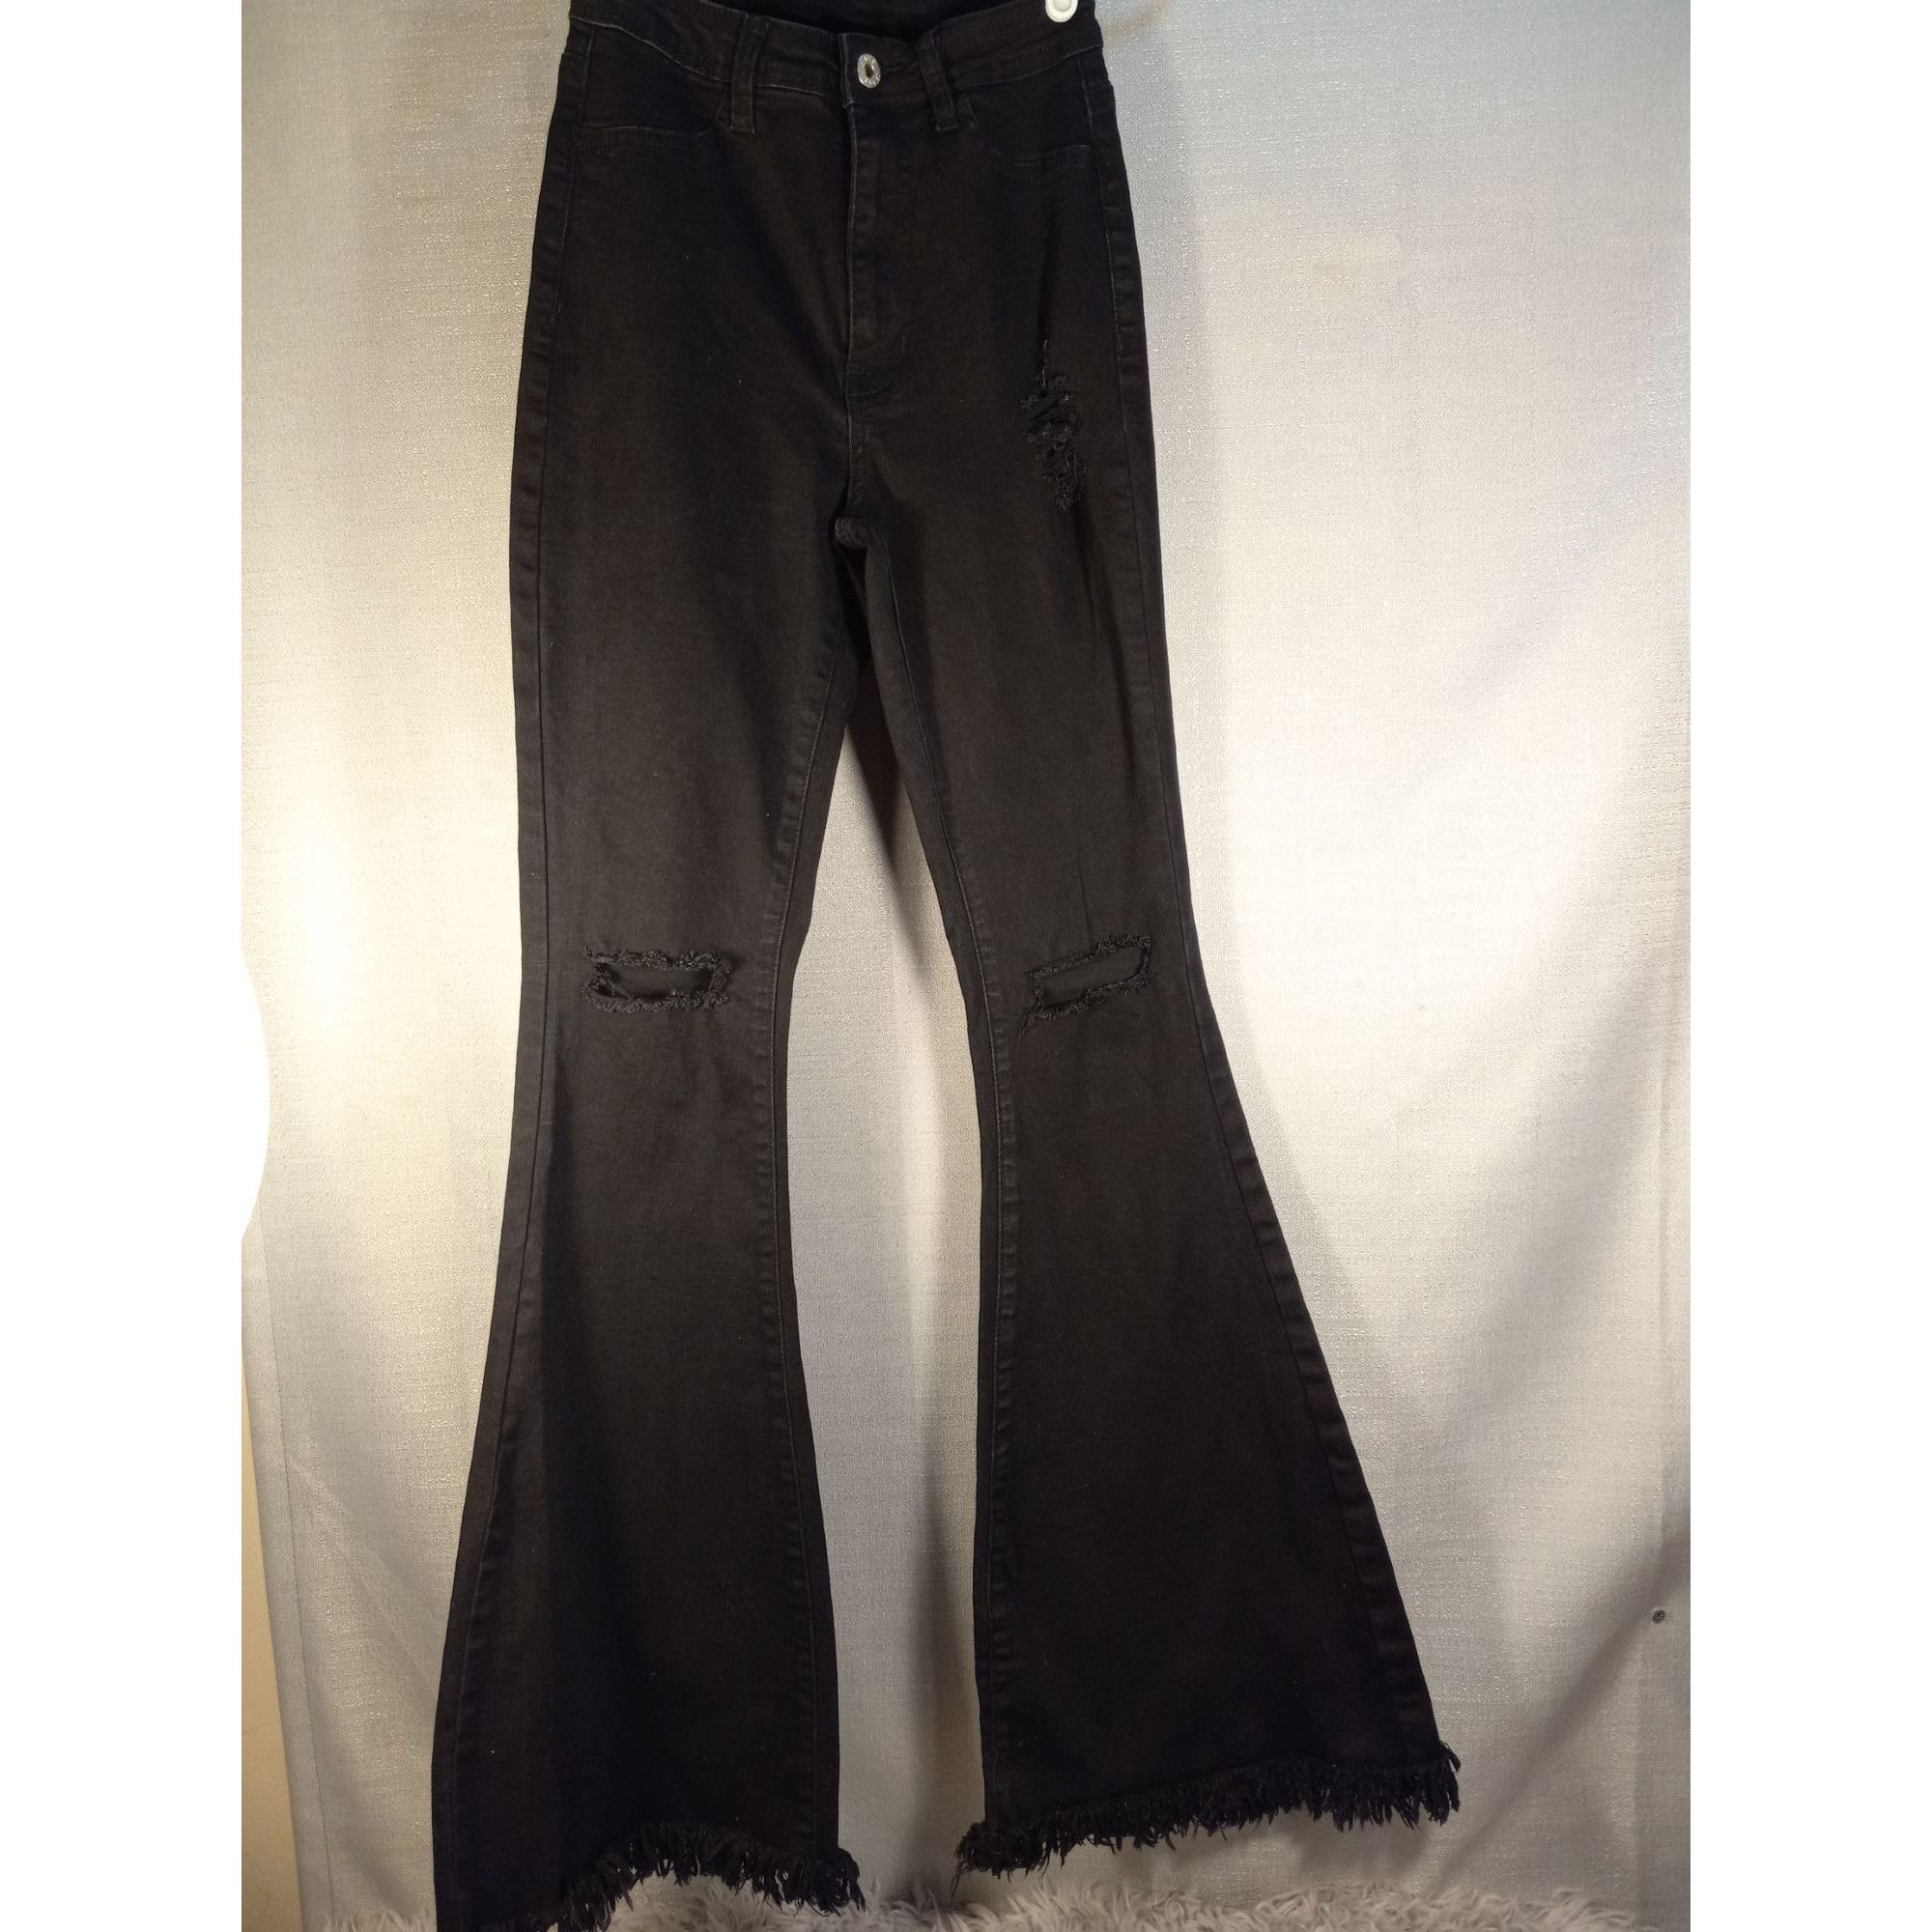 Christian Kimber K.I.M Kimberly woman's S black flare frayer belle buttom jea Size 32" / US 10 / IT 46 - 1 Preview